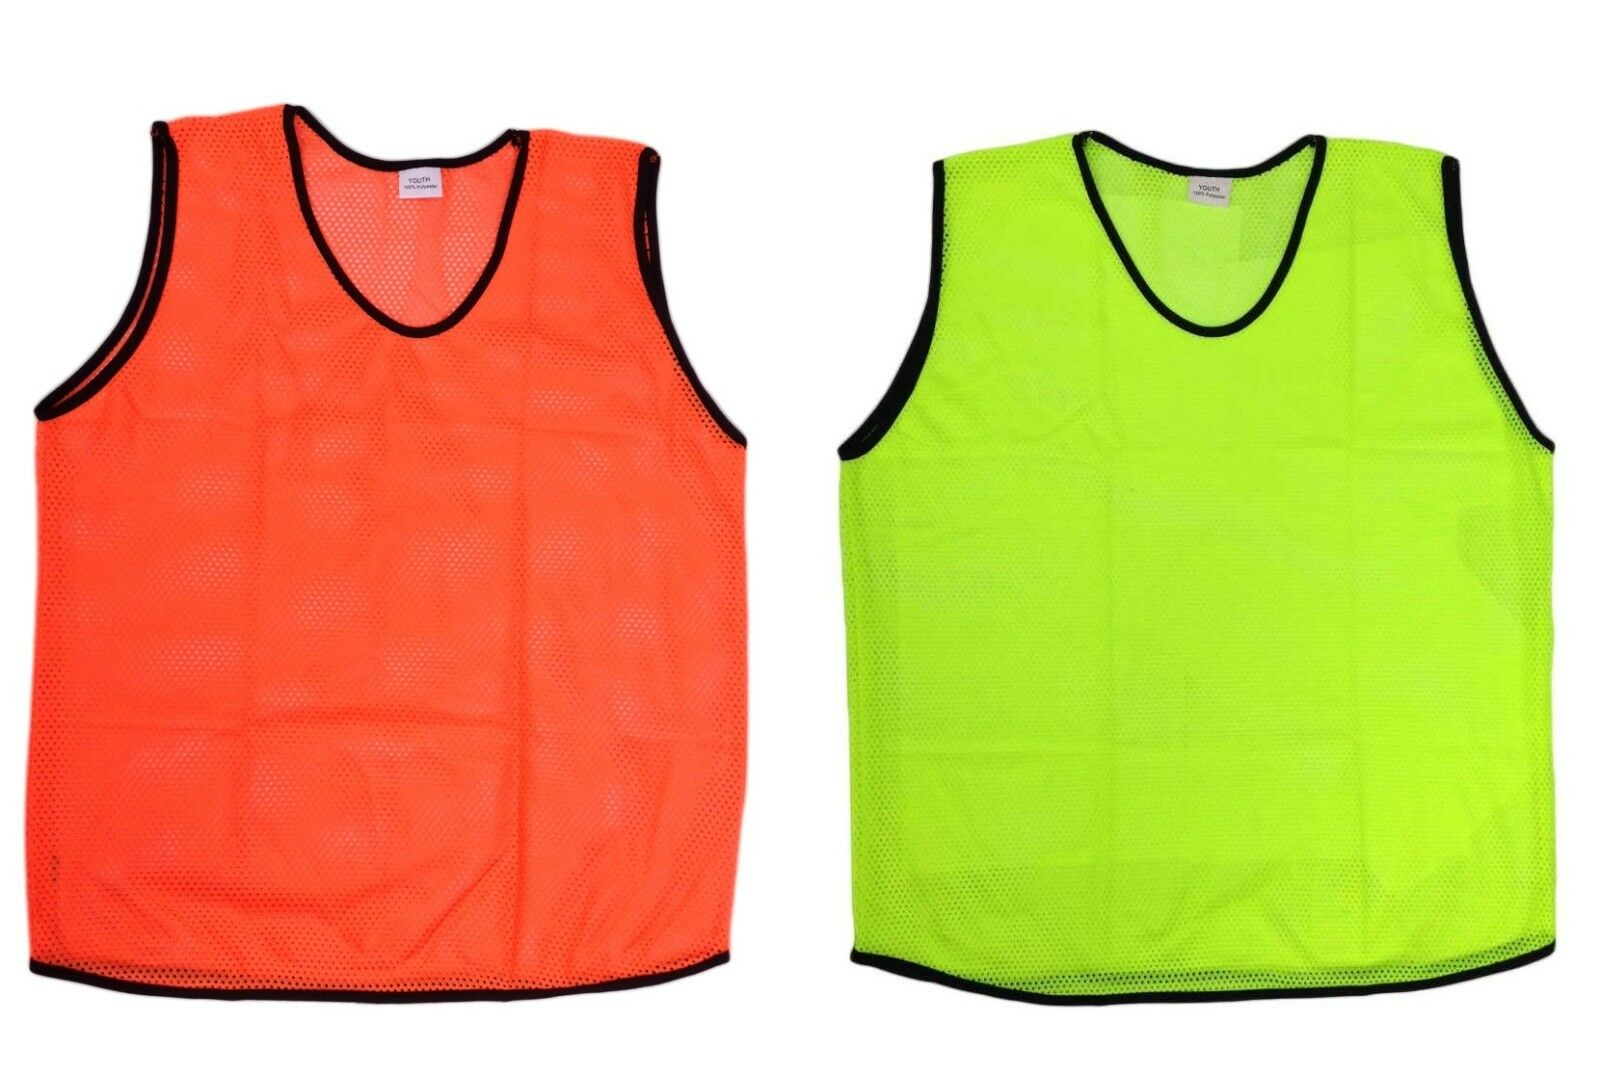 12 Scrimmage Vests Soccer Basketball Team Training Youth Adult Pinnies Jerseys